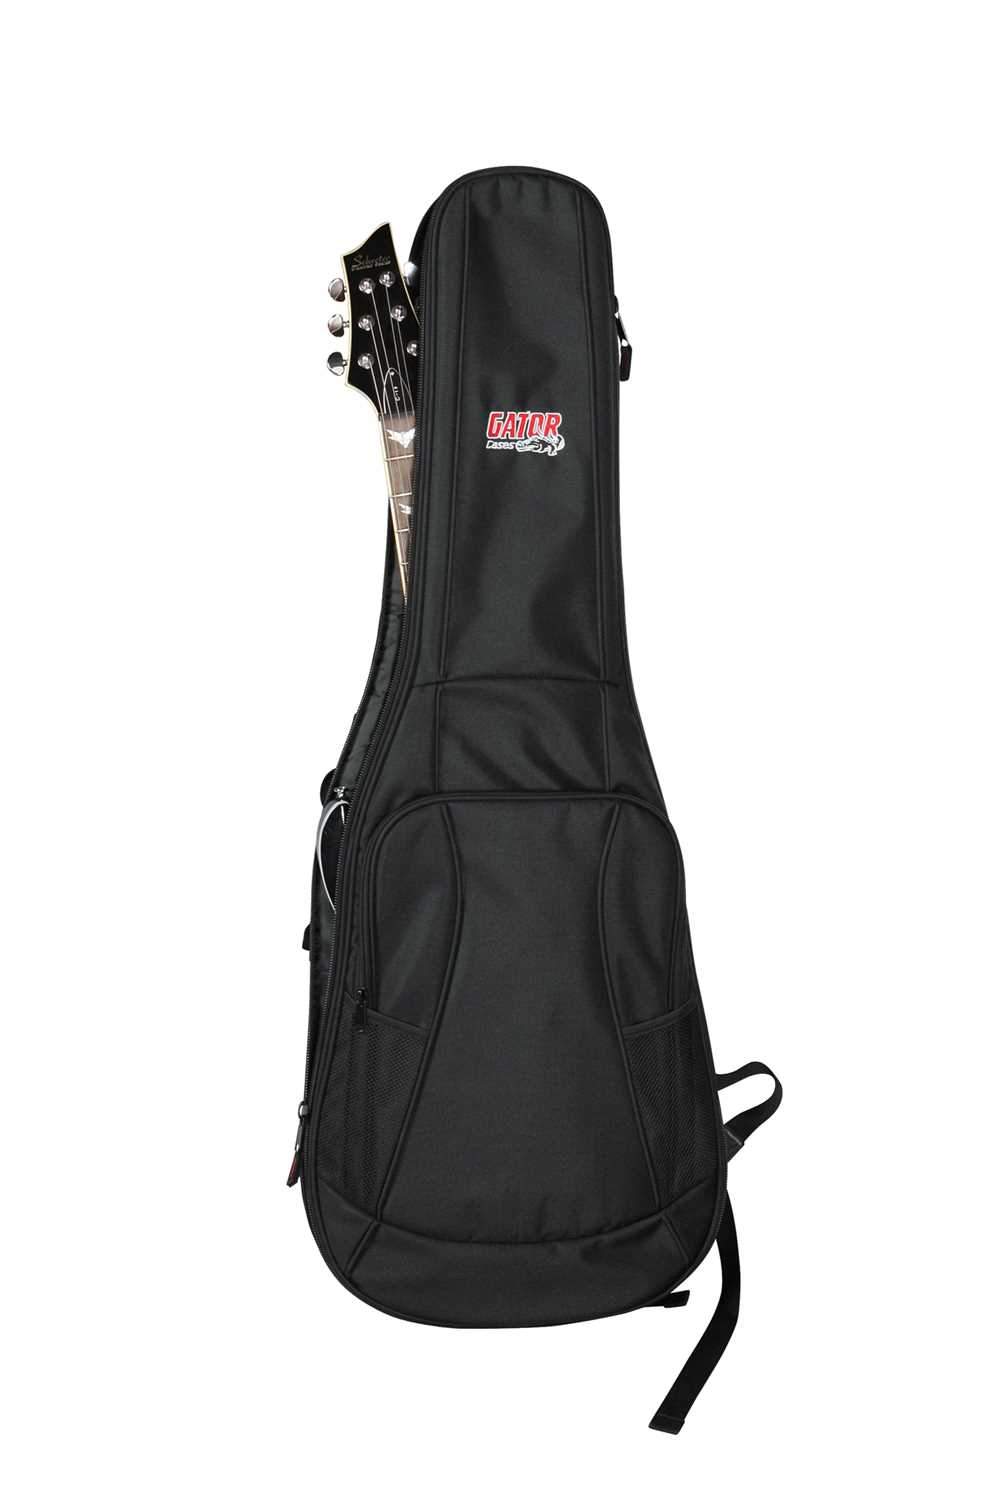 Gator GB-4G-ELECTRIC 4G Series Gig Bag for Electric Guitars - ProSound and Stage Lighting